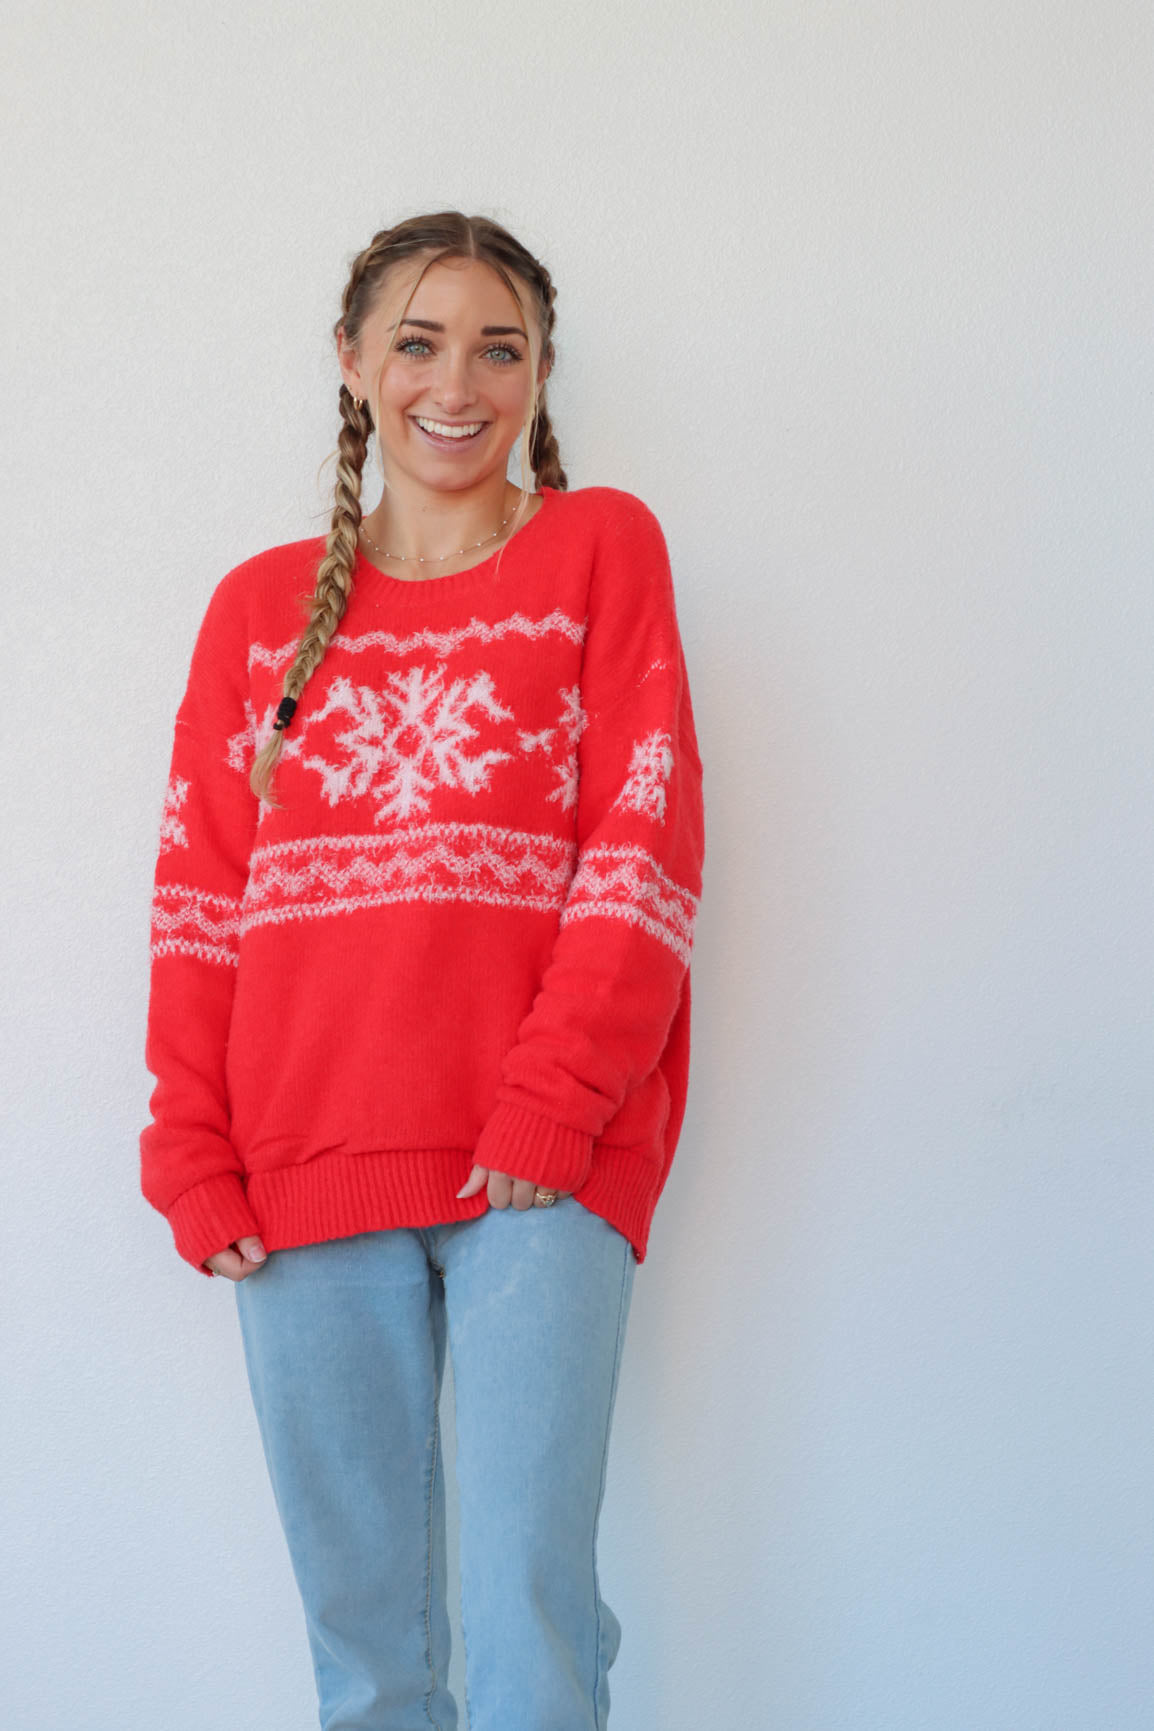 girl wearing red sweater with white snow flake pattern